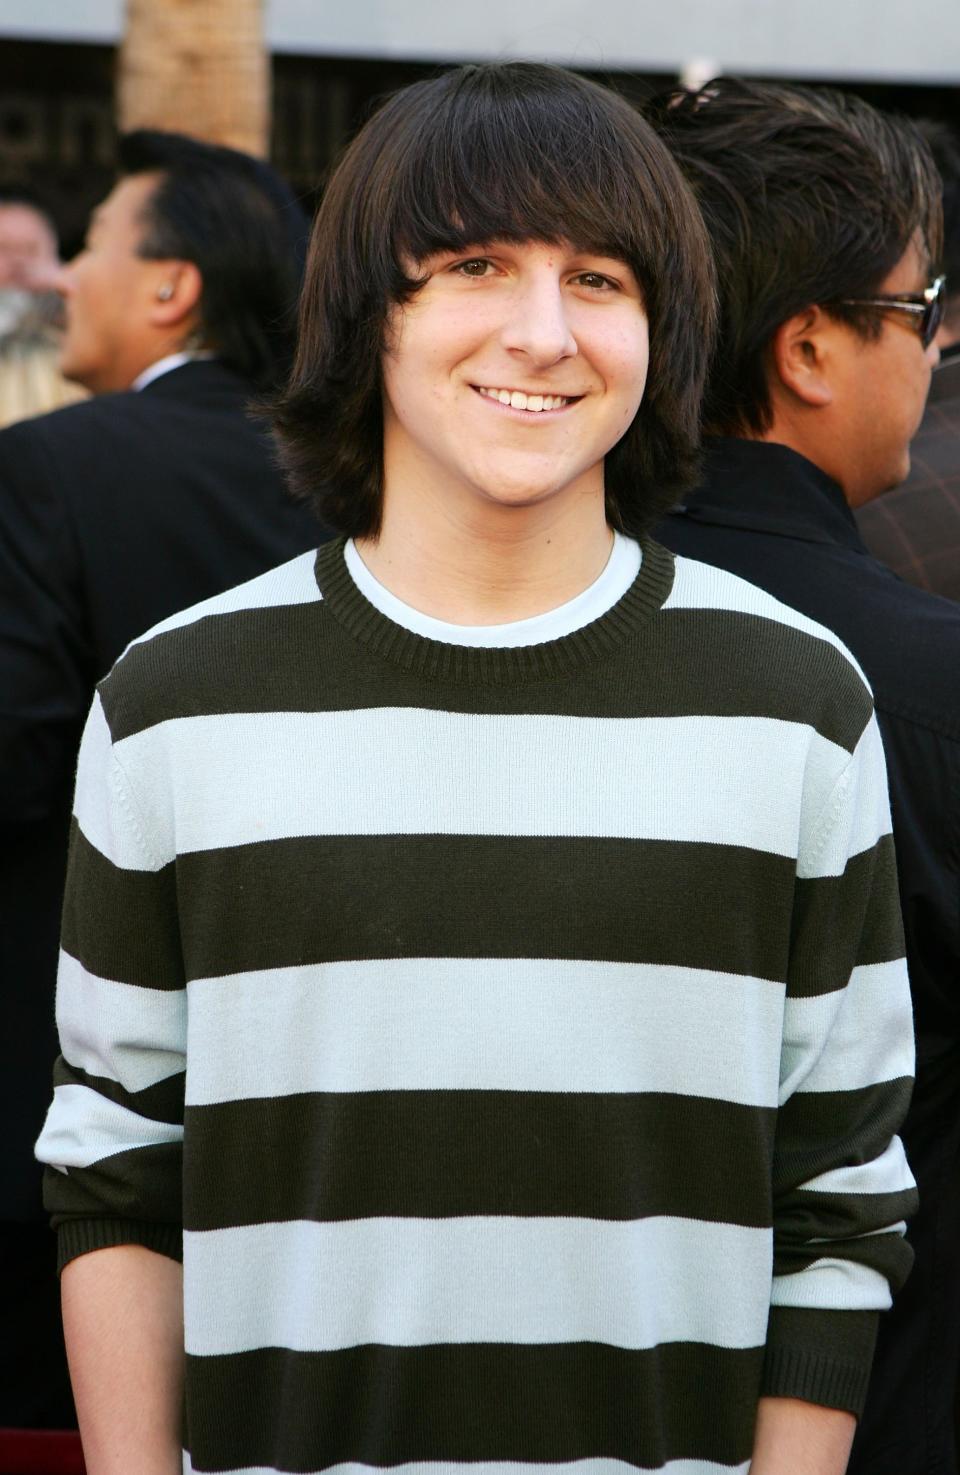 Mitchel Musso at the 2007 premiere of "The Game Plan"